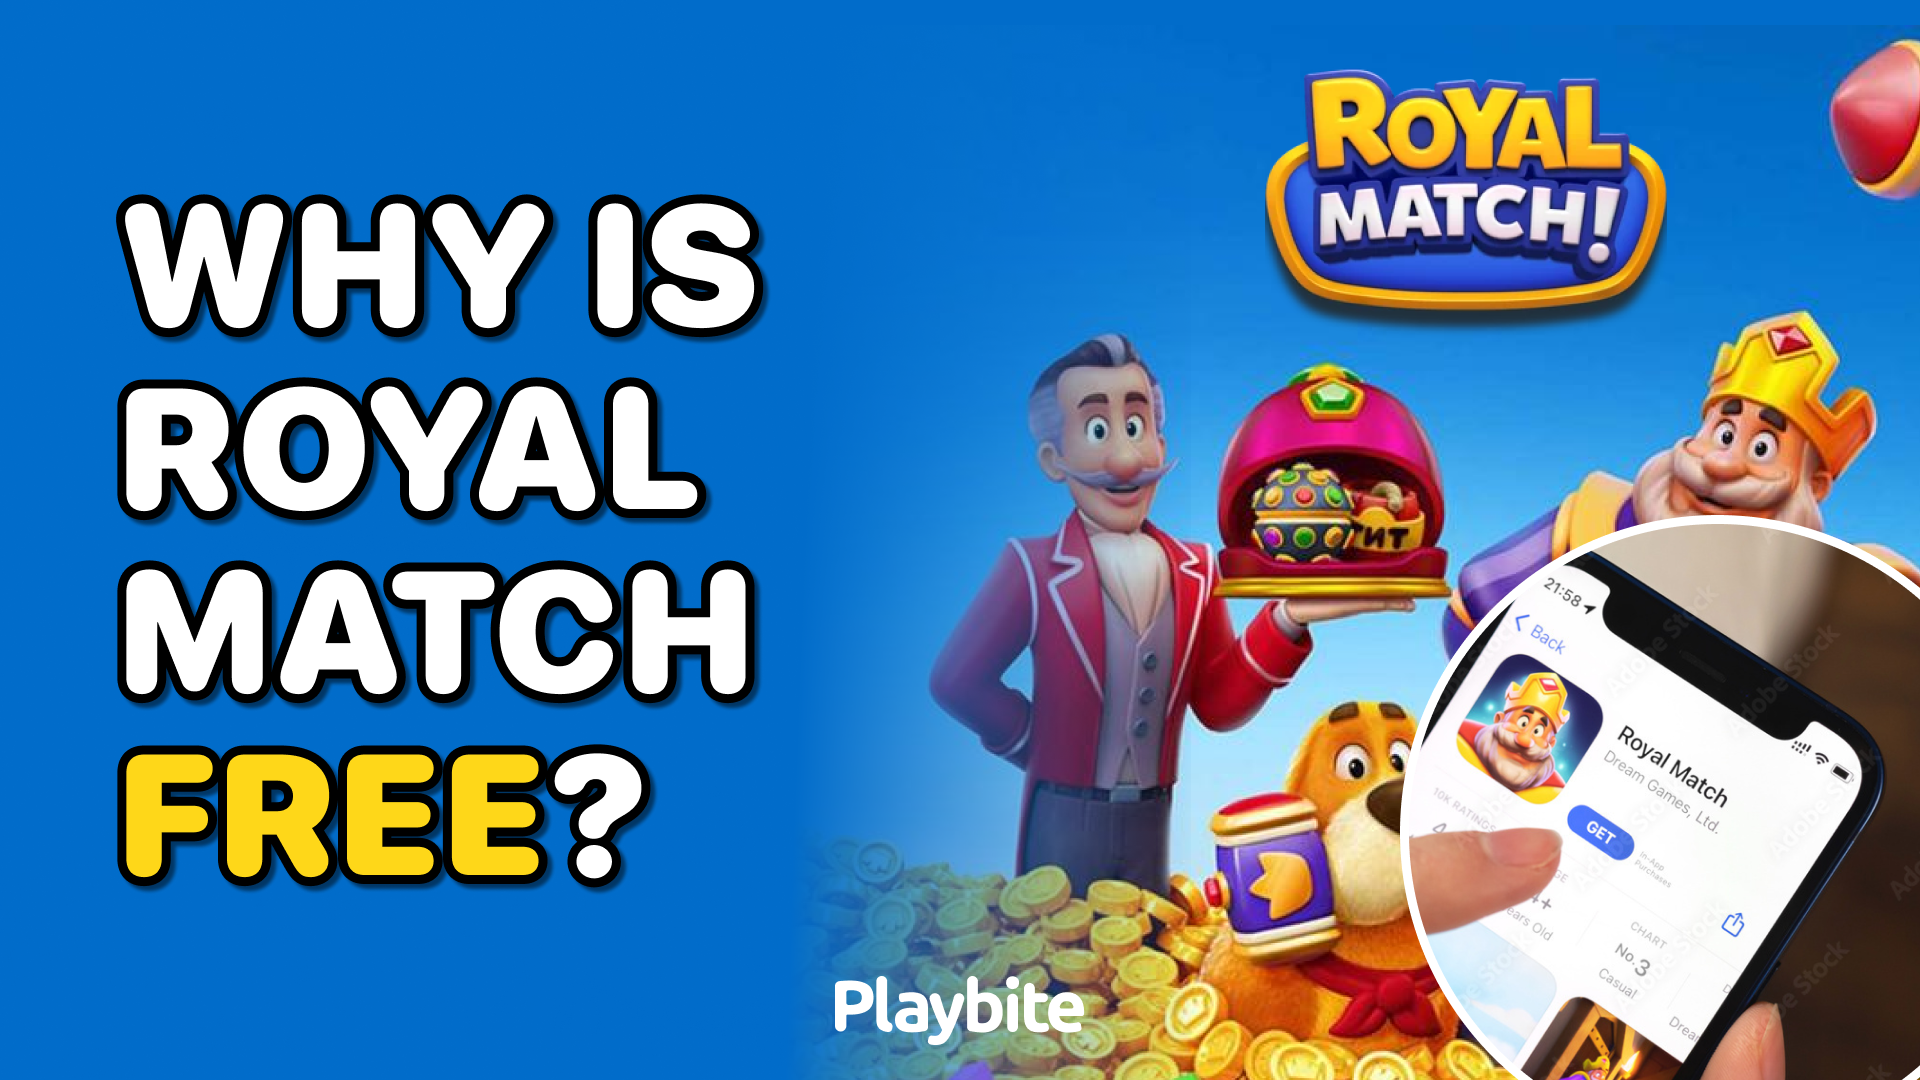 Why Is Royal Match Free?